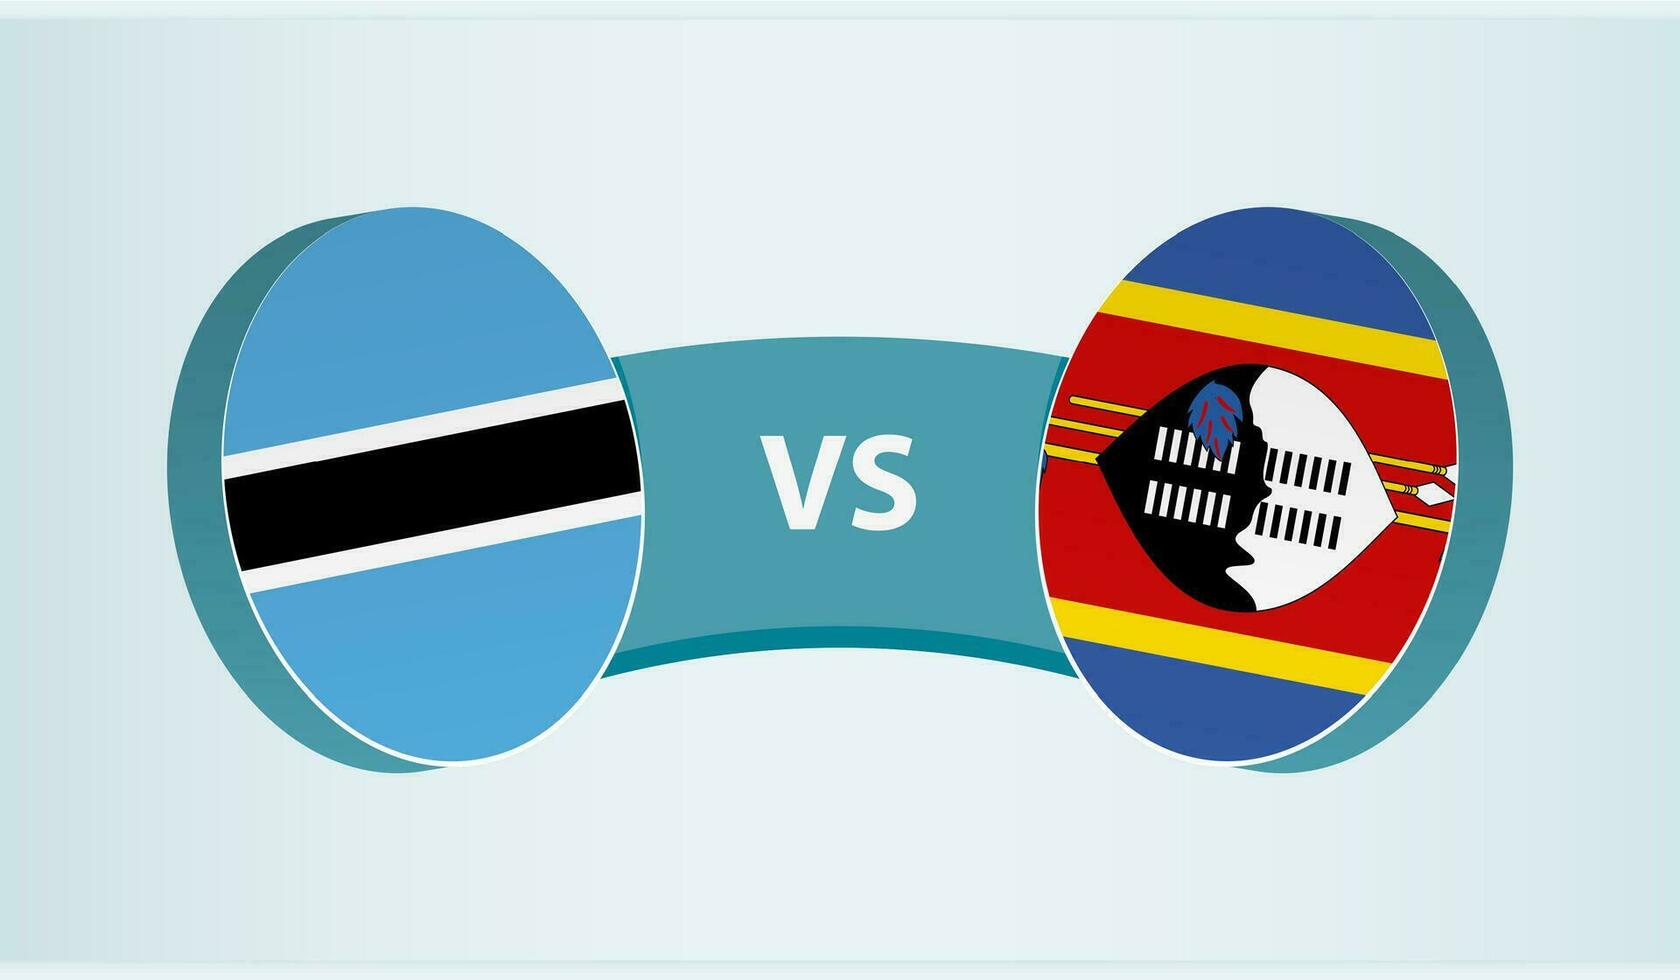 Botswana versus Swaziland, team sports competition concept. vector